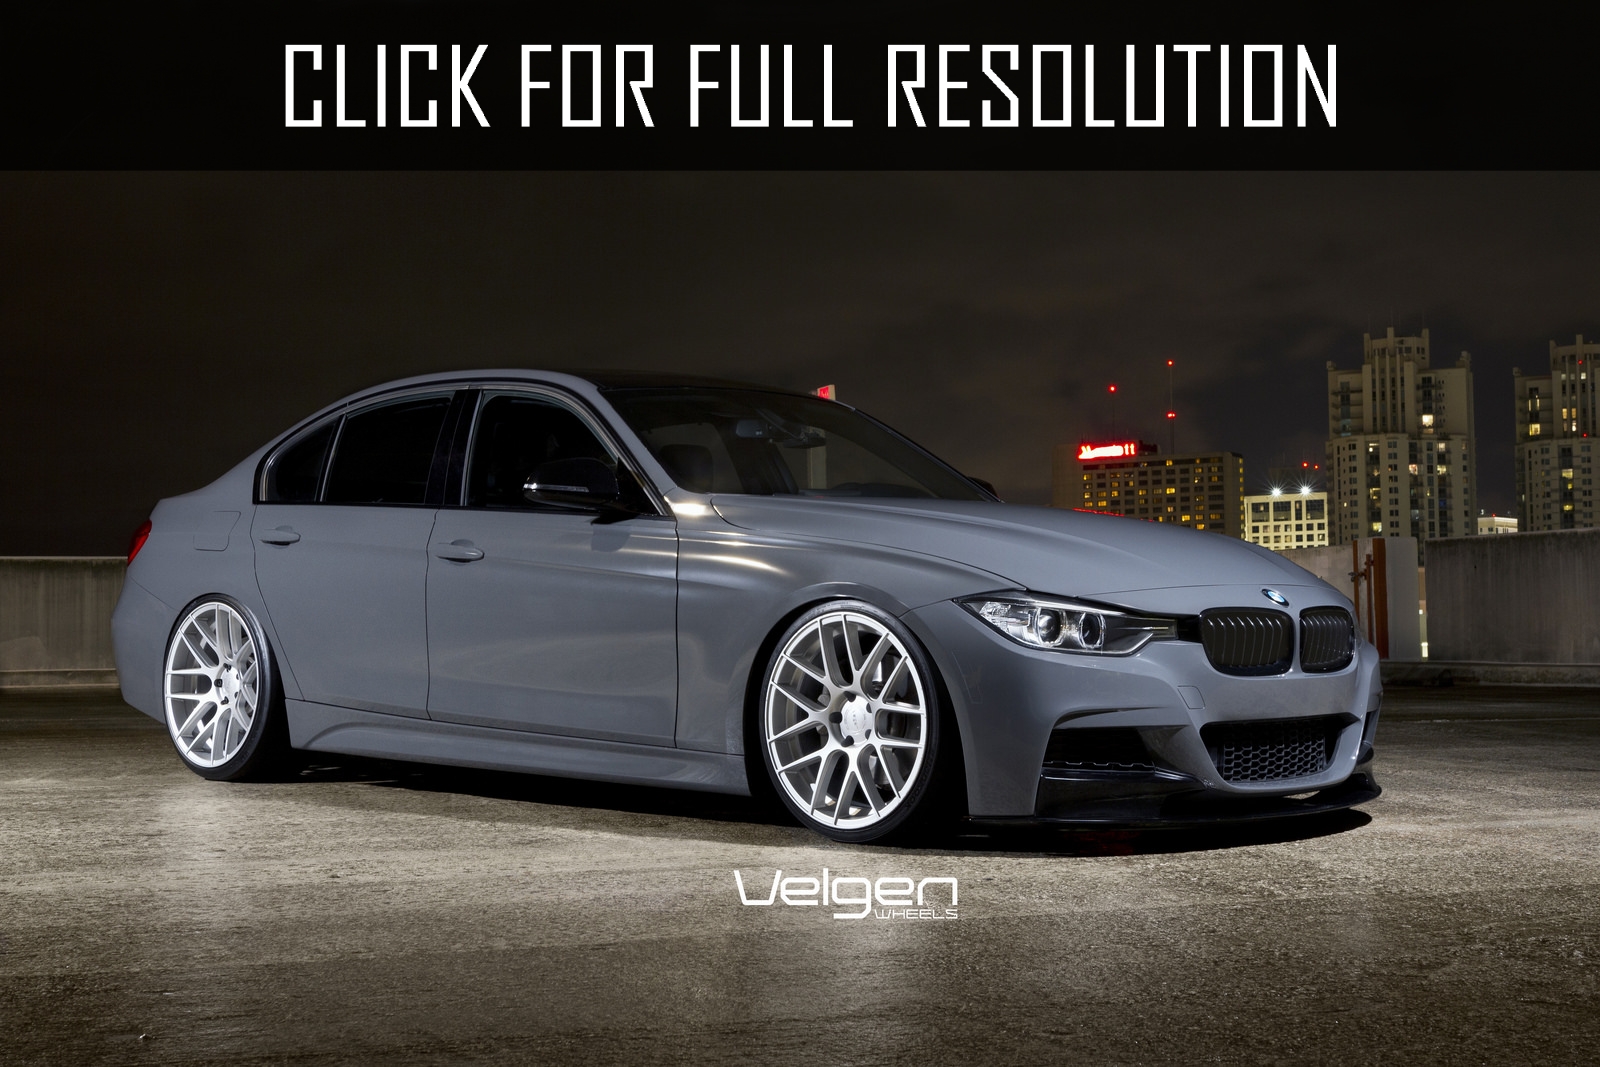 Bmw F30 335i M Sport amazing photo gallery, some information and